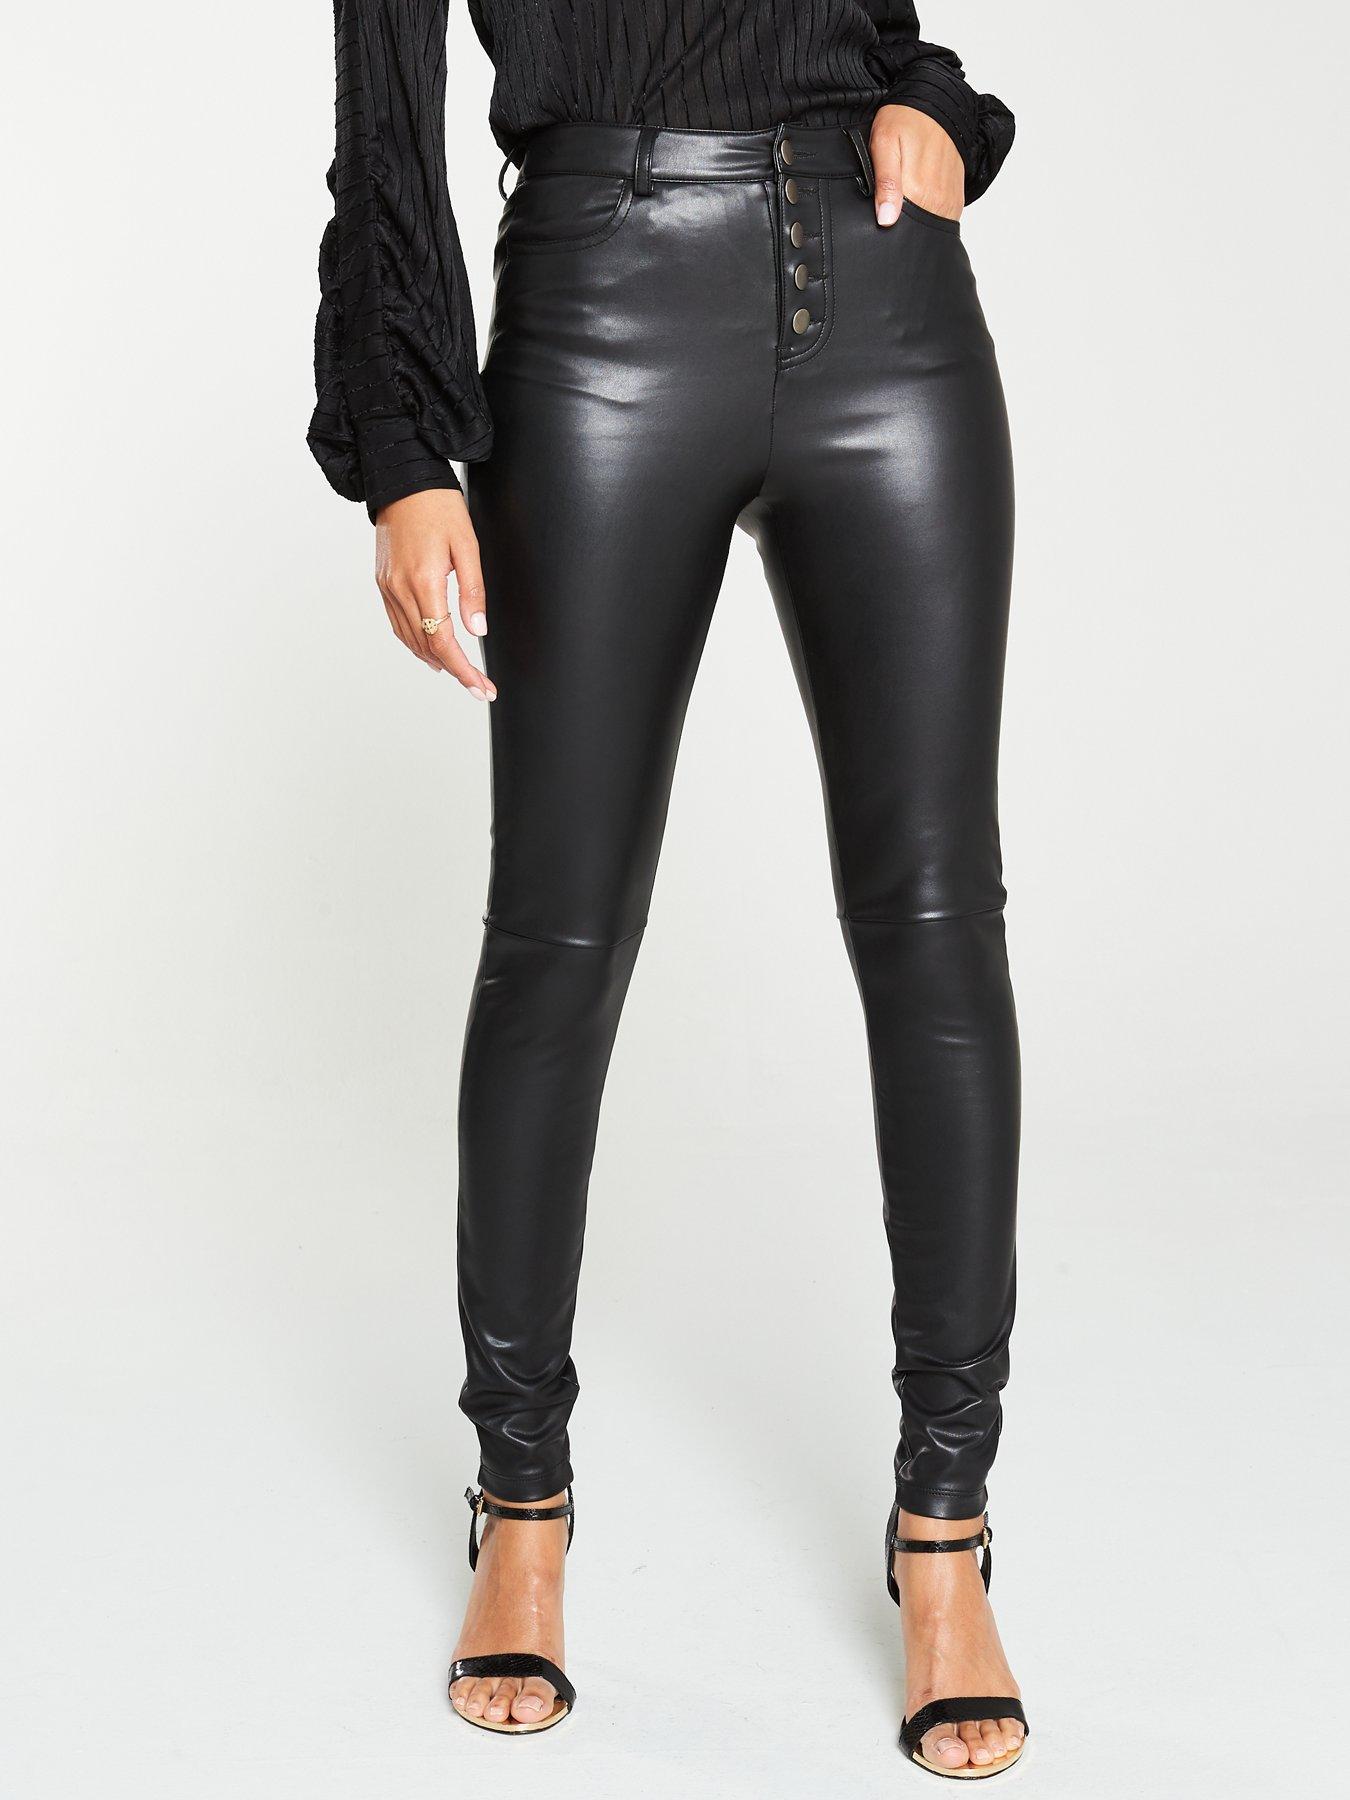 leather trousers very